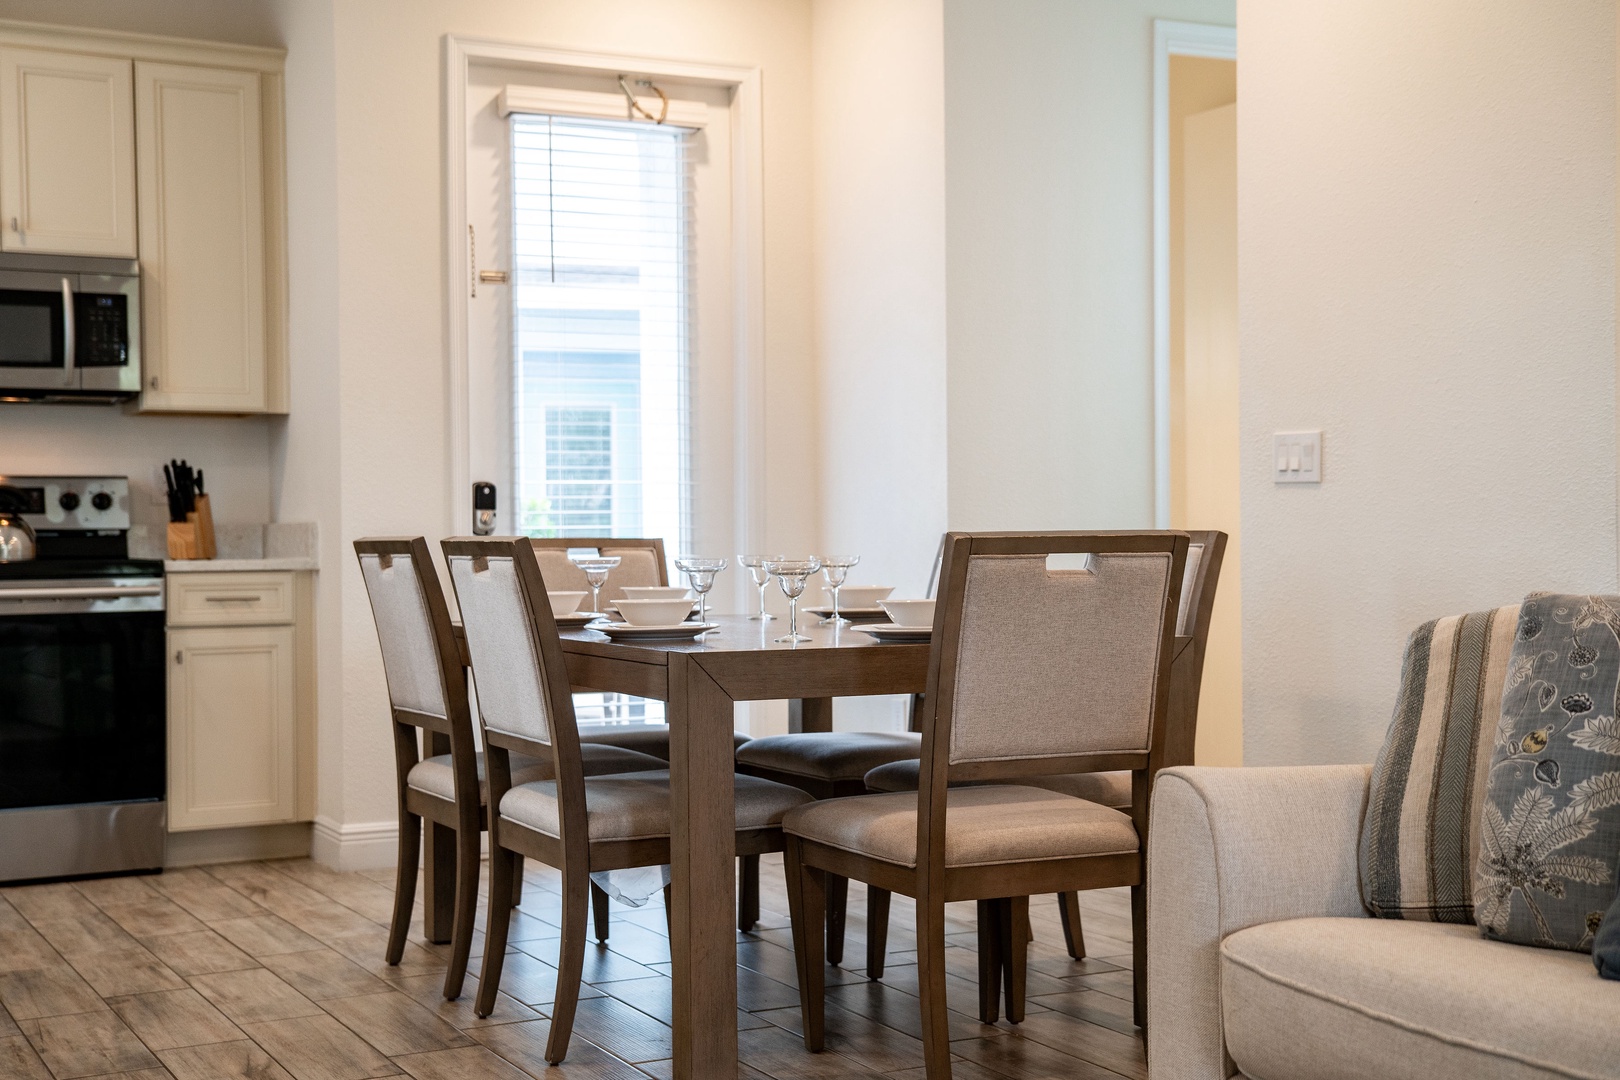 Gather for elegant meals together at the dining table, with seating for 6